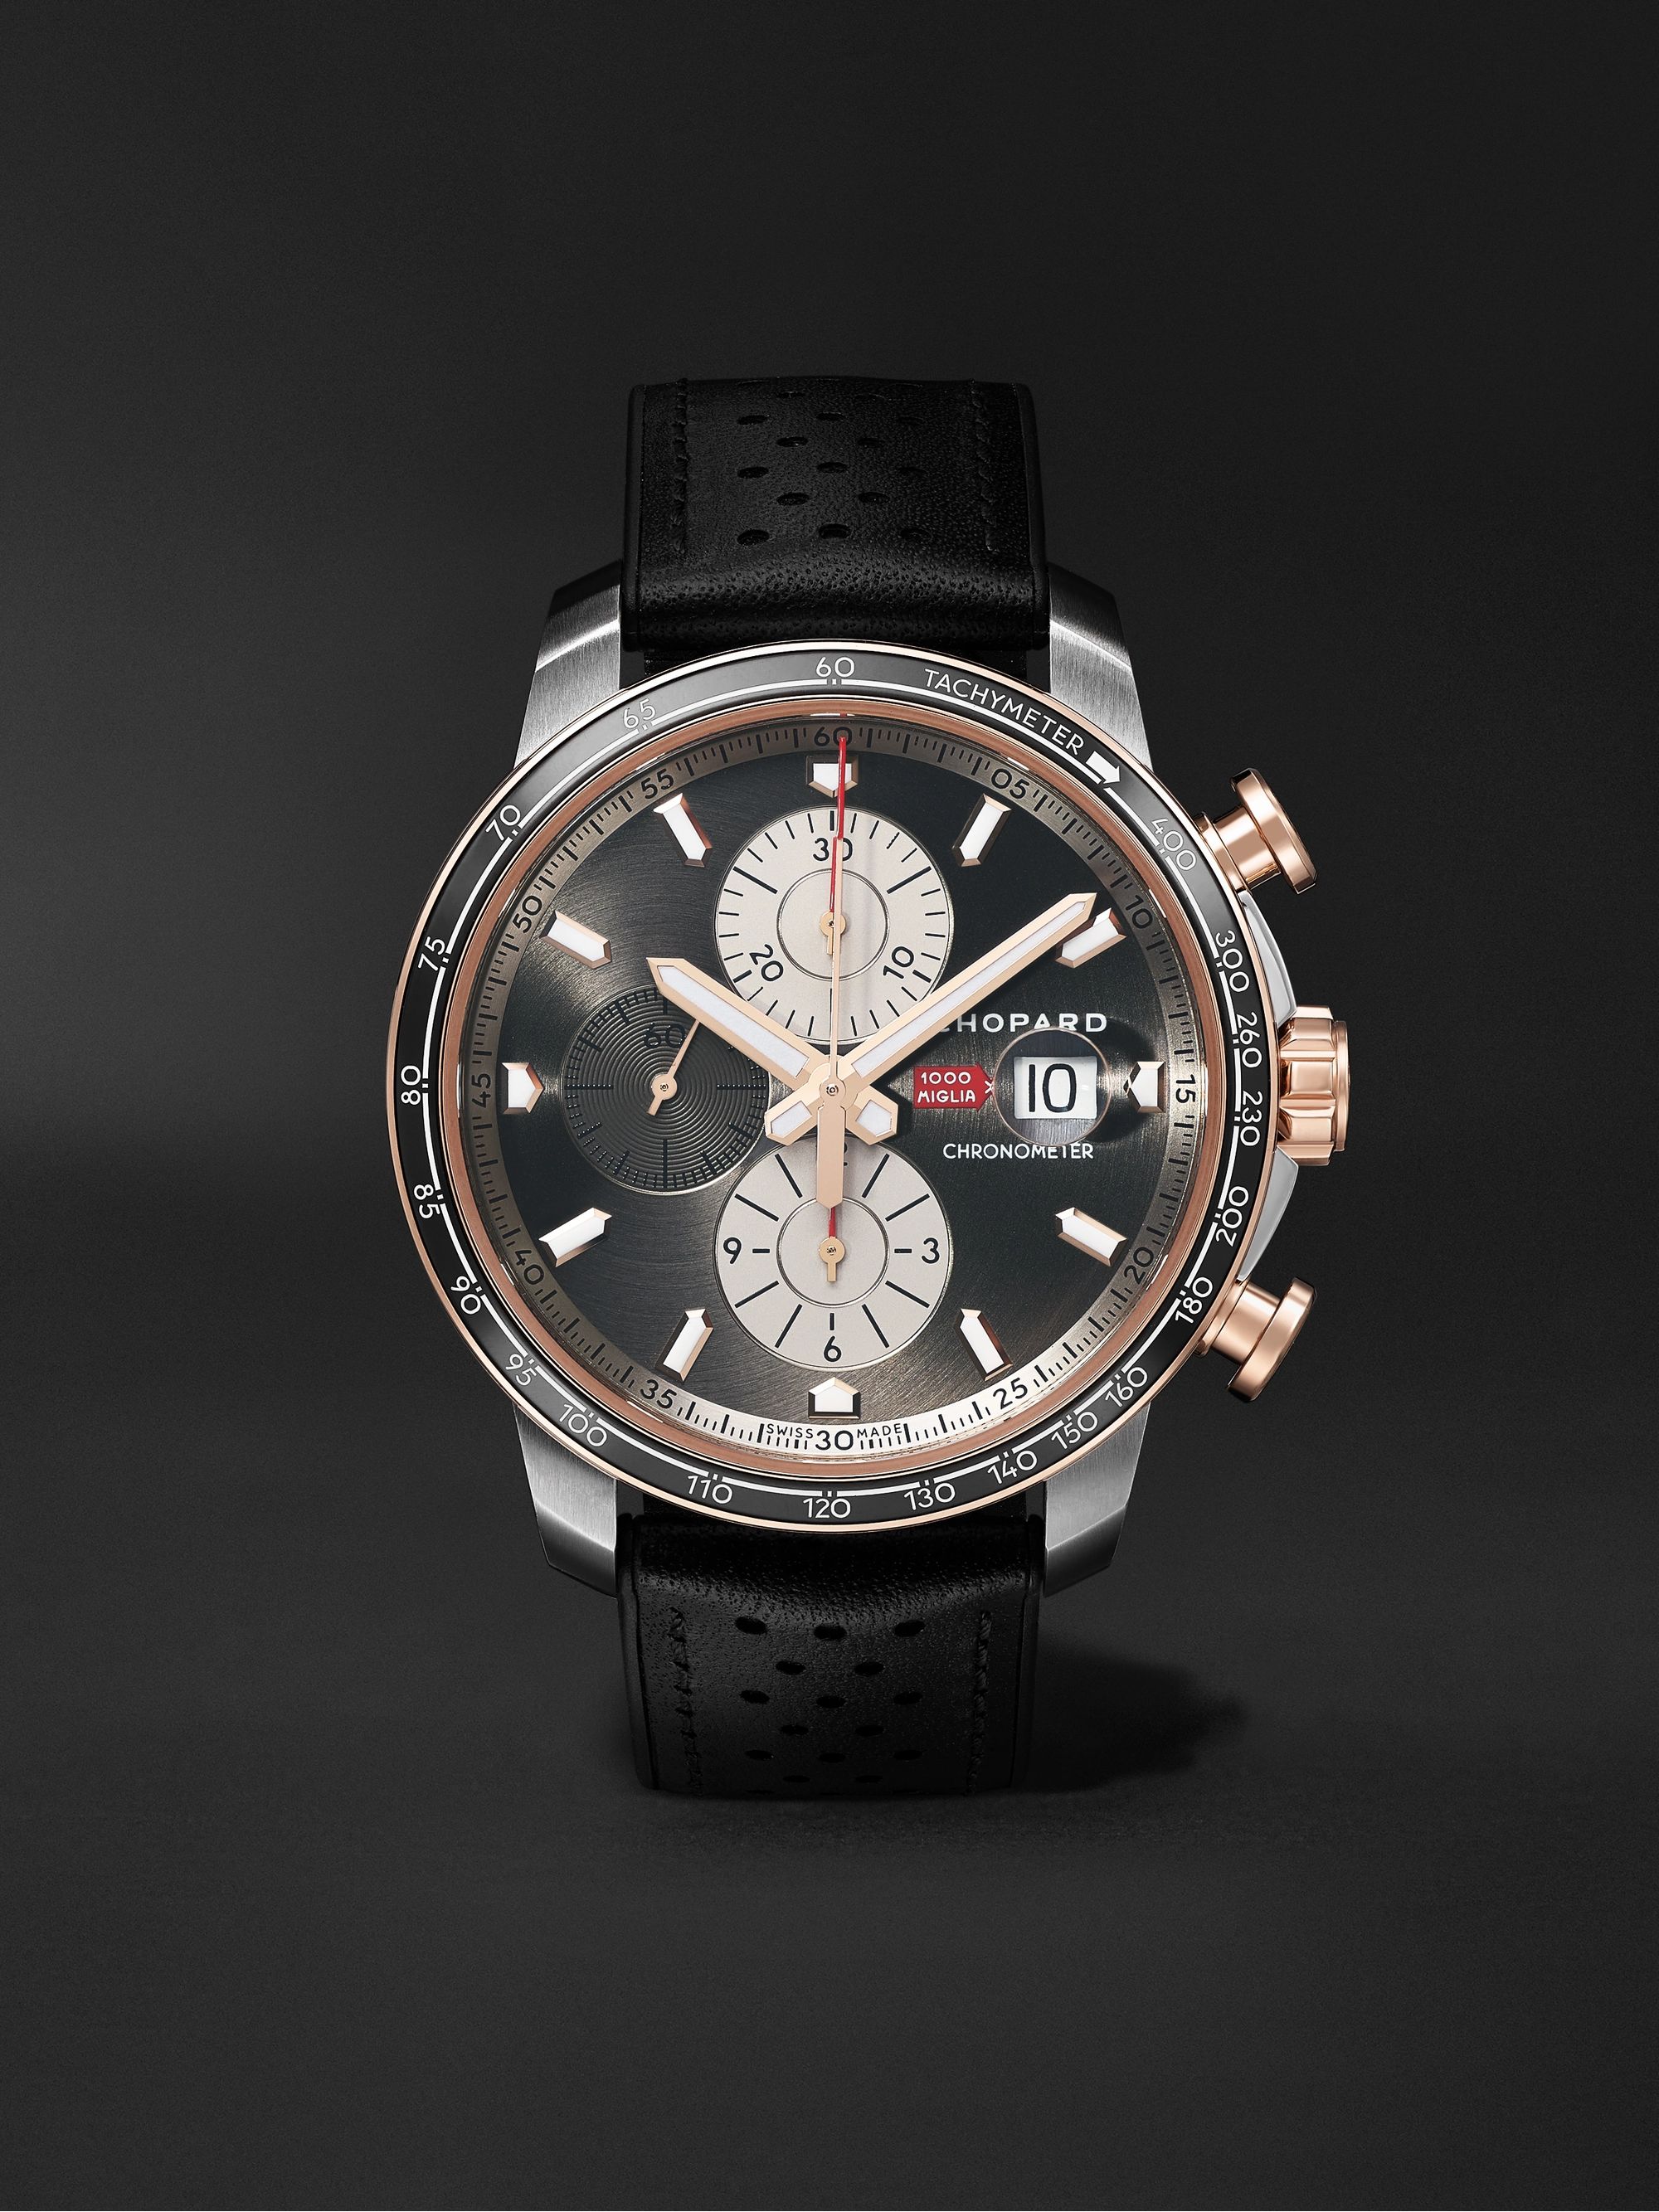 CHOPARD Mille Miglia 2021 Race Edition Limited Edition Automatic Chronograph 44mm Stainless Steel, 18-Karat Rose Gold and Leather Watch, Ref. No. 168589-3028